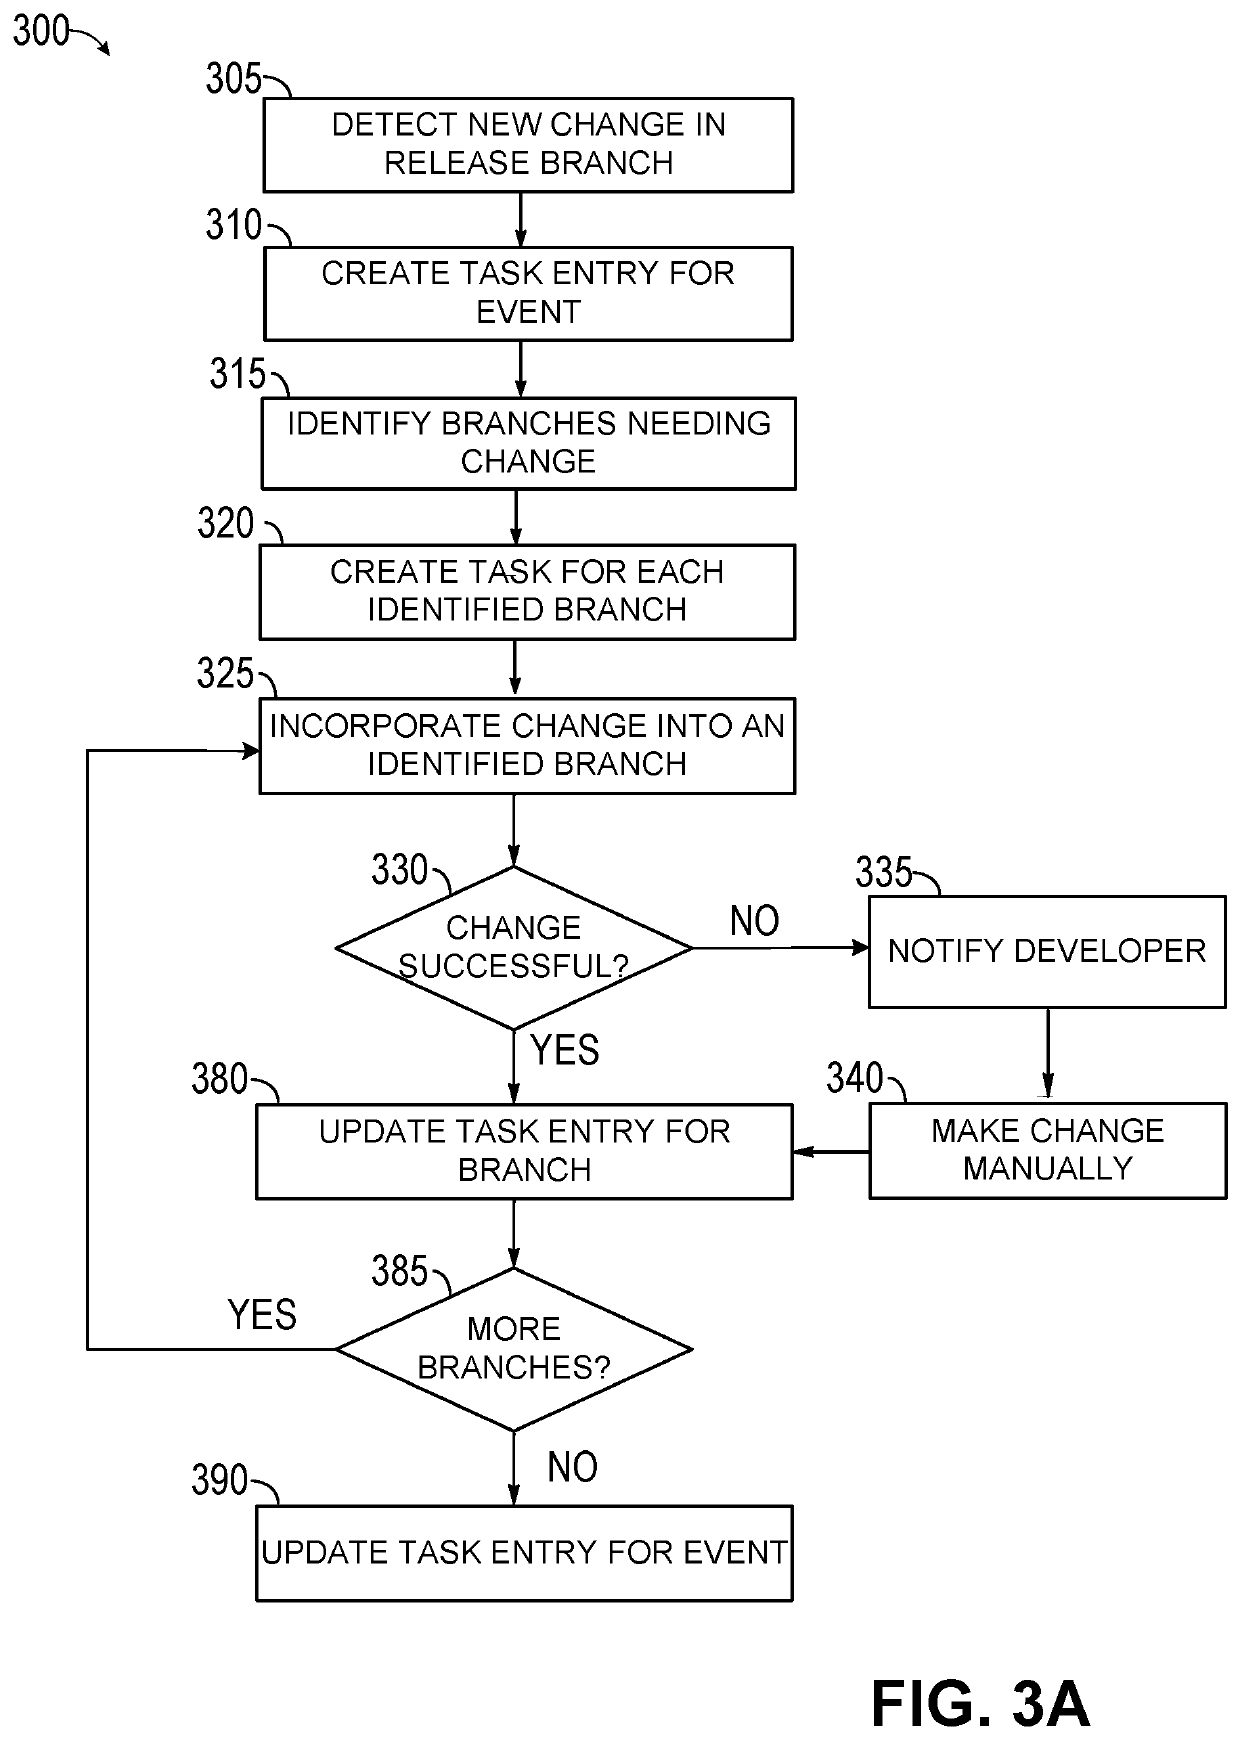 Mechanism for automatically incorporating software code changes into proper channels